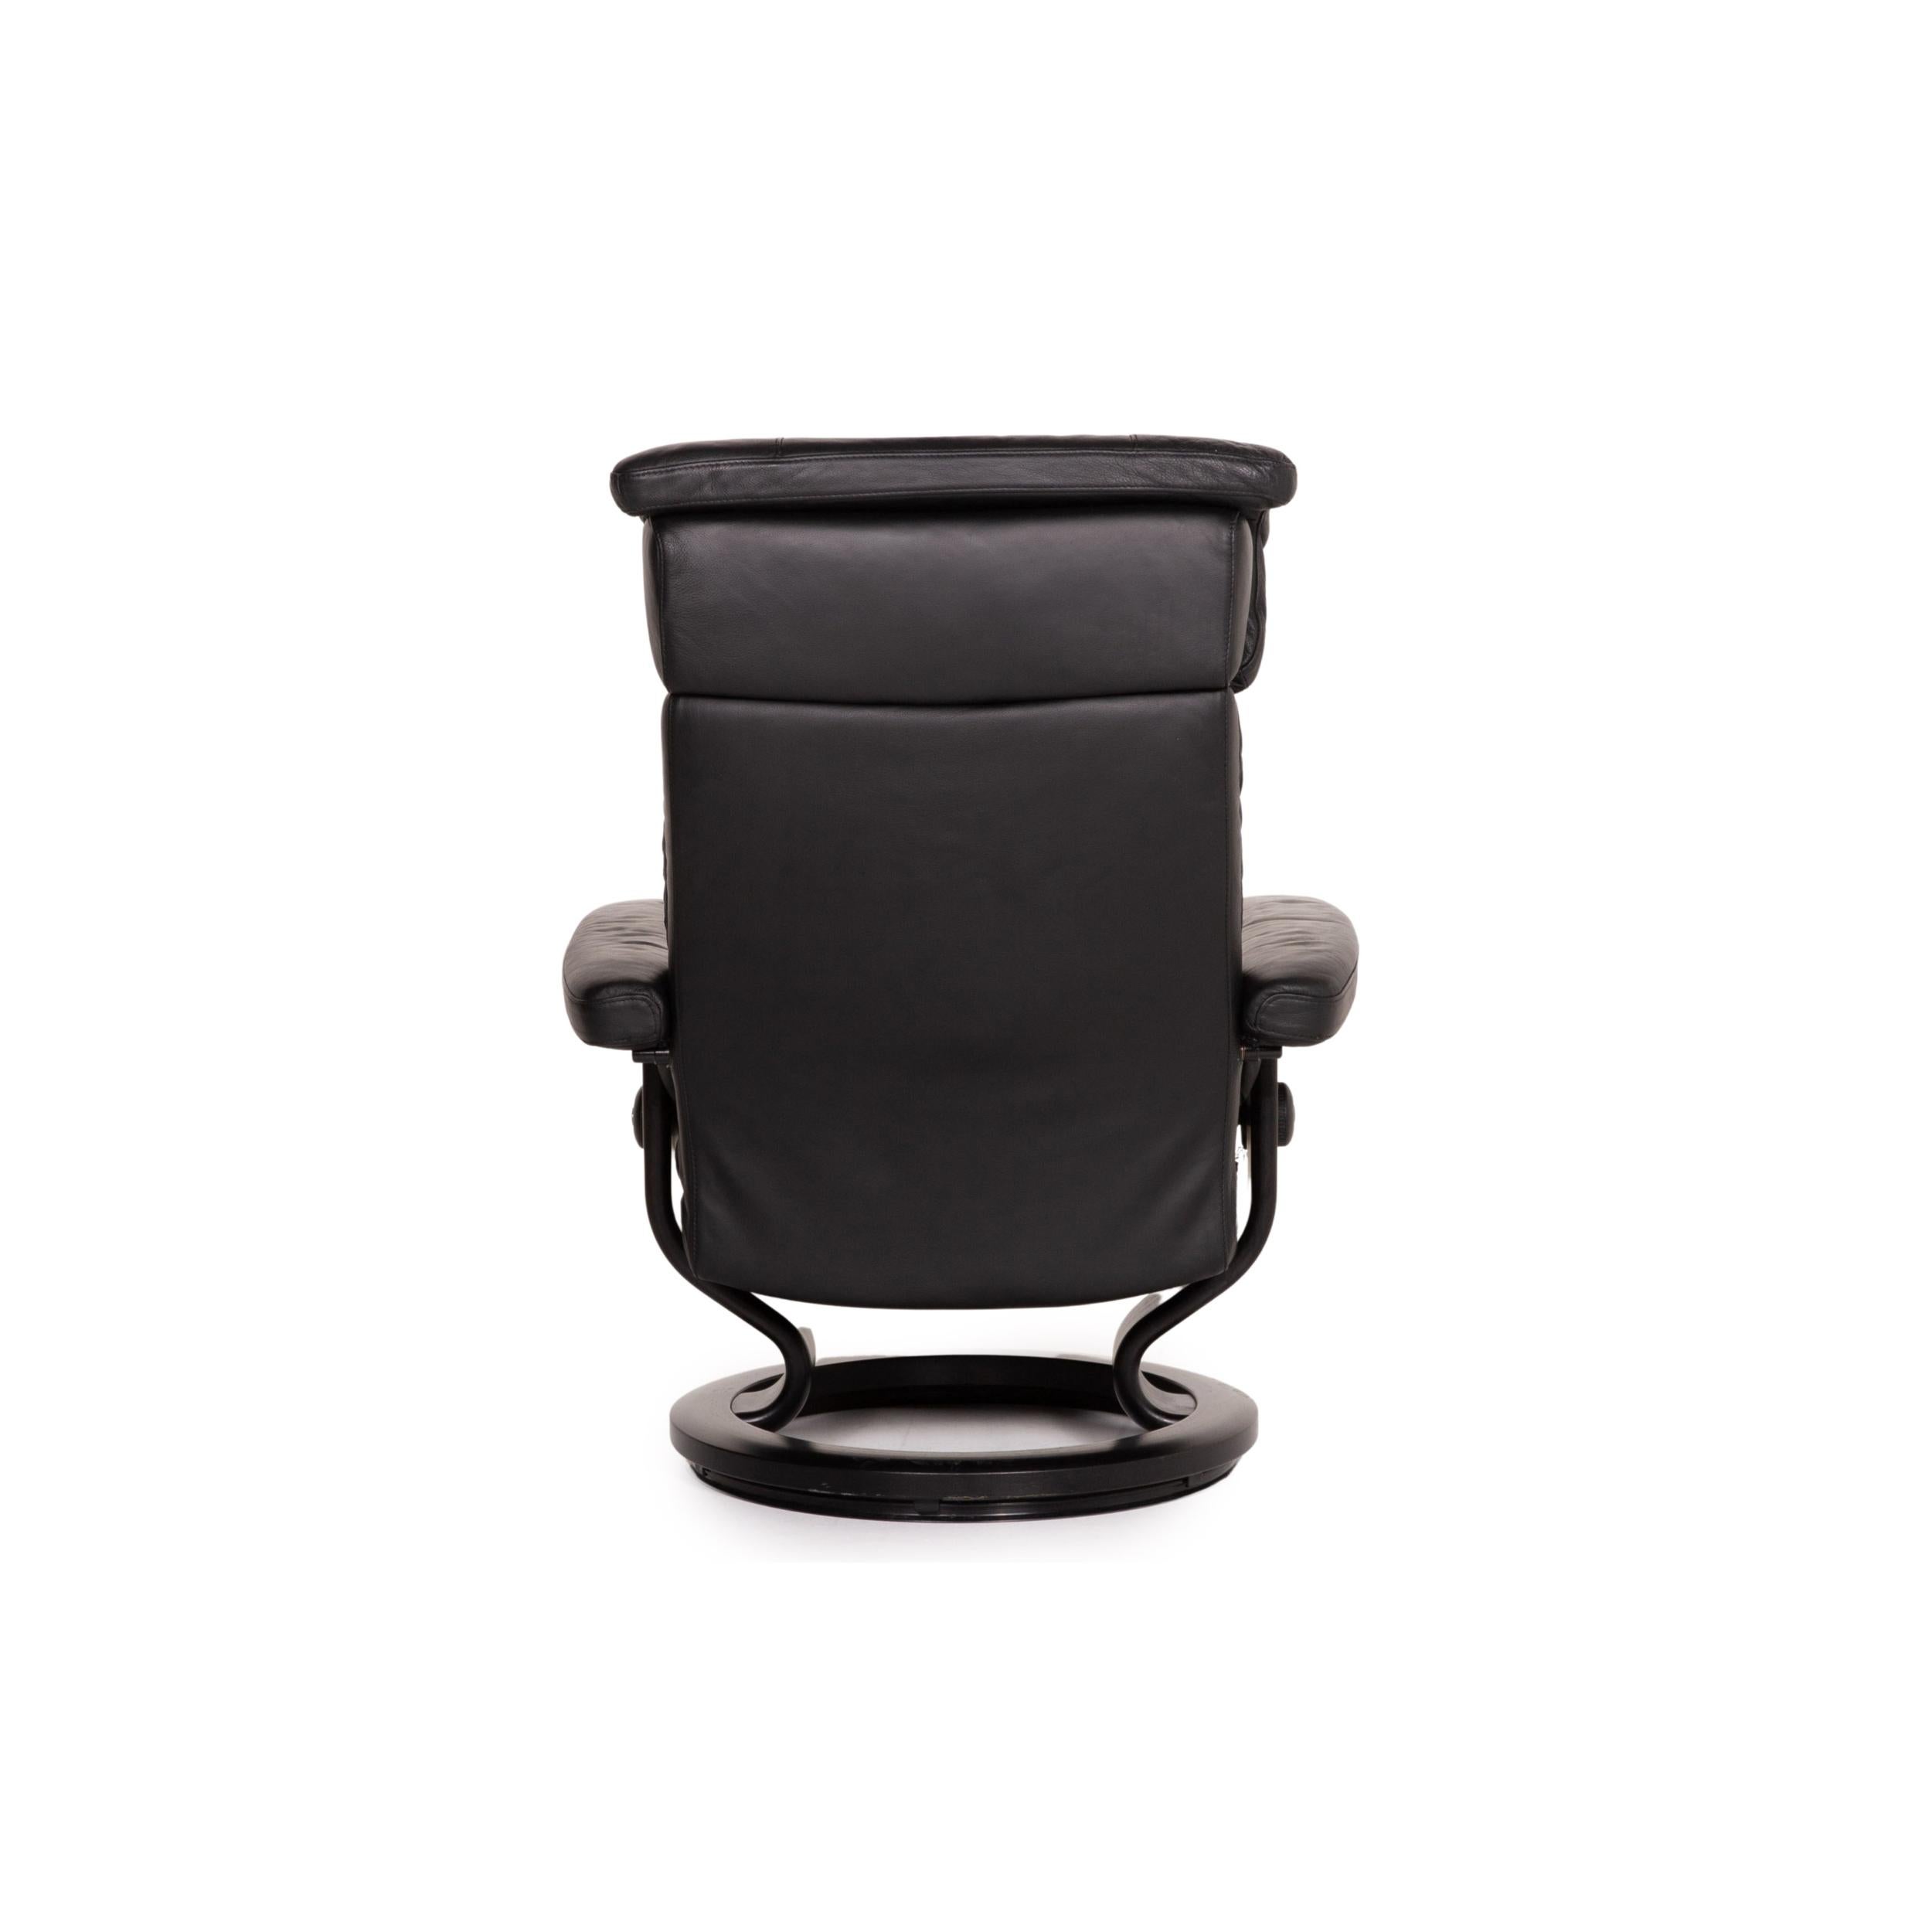 Stressless Memphis Leather Armchair Size M Incl. Black Stool Function Relax 7